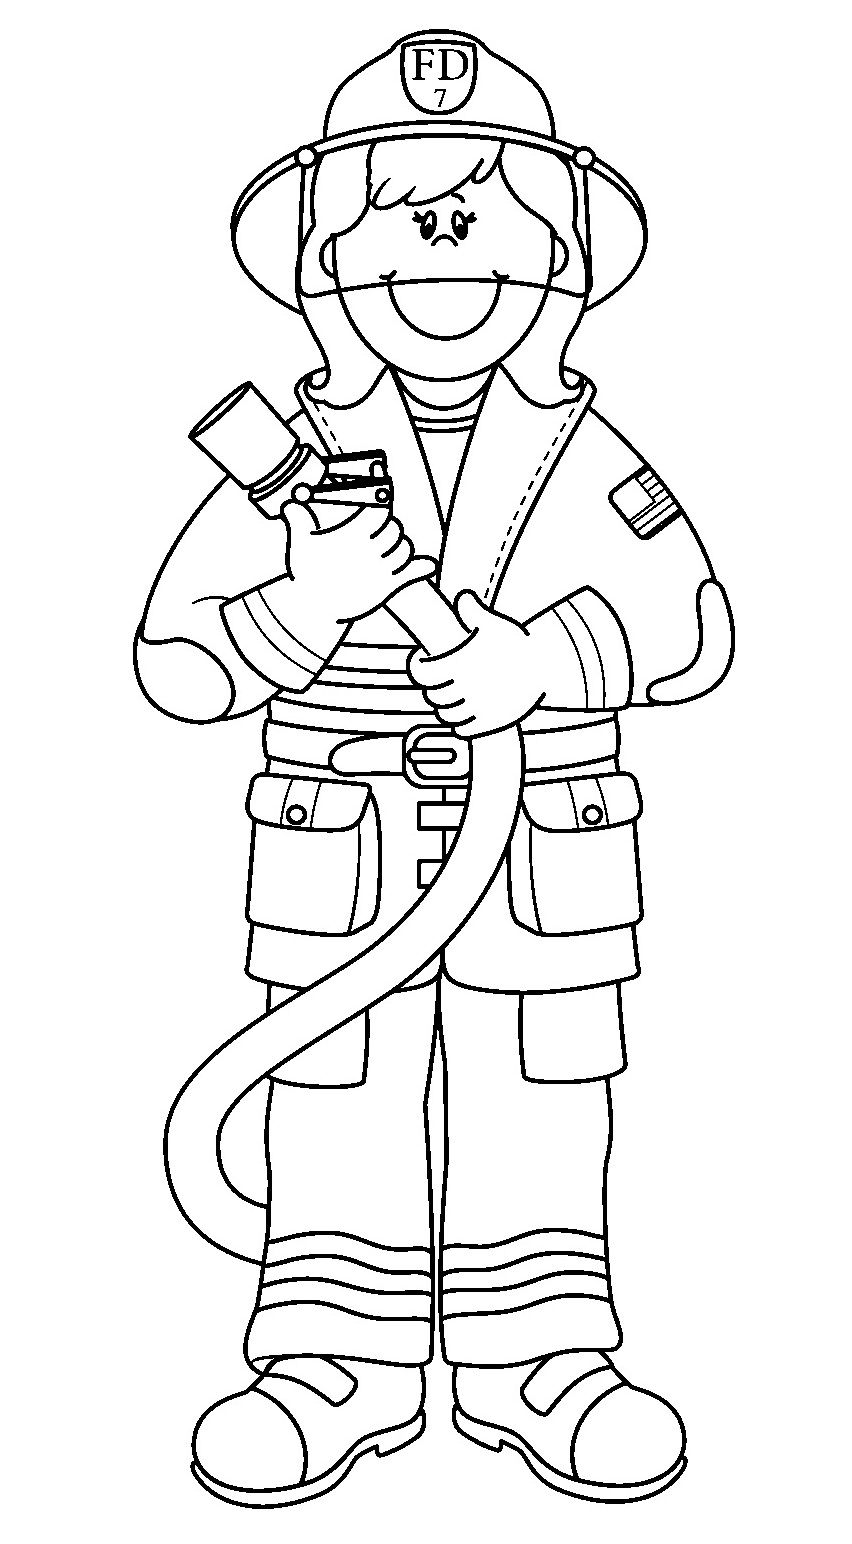 Printable firefighter coloring pages coloring me firefighter clipart female firefighter firefighter crafts